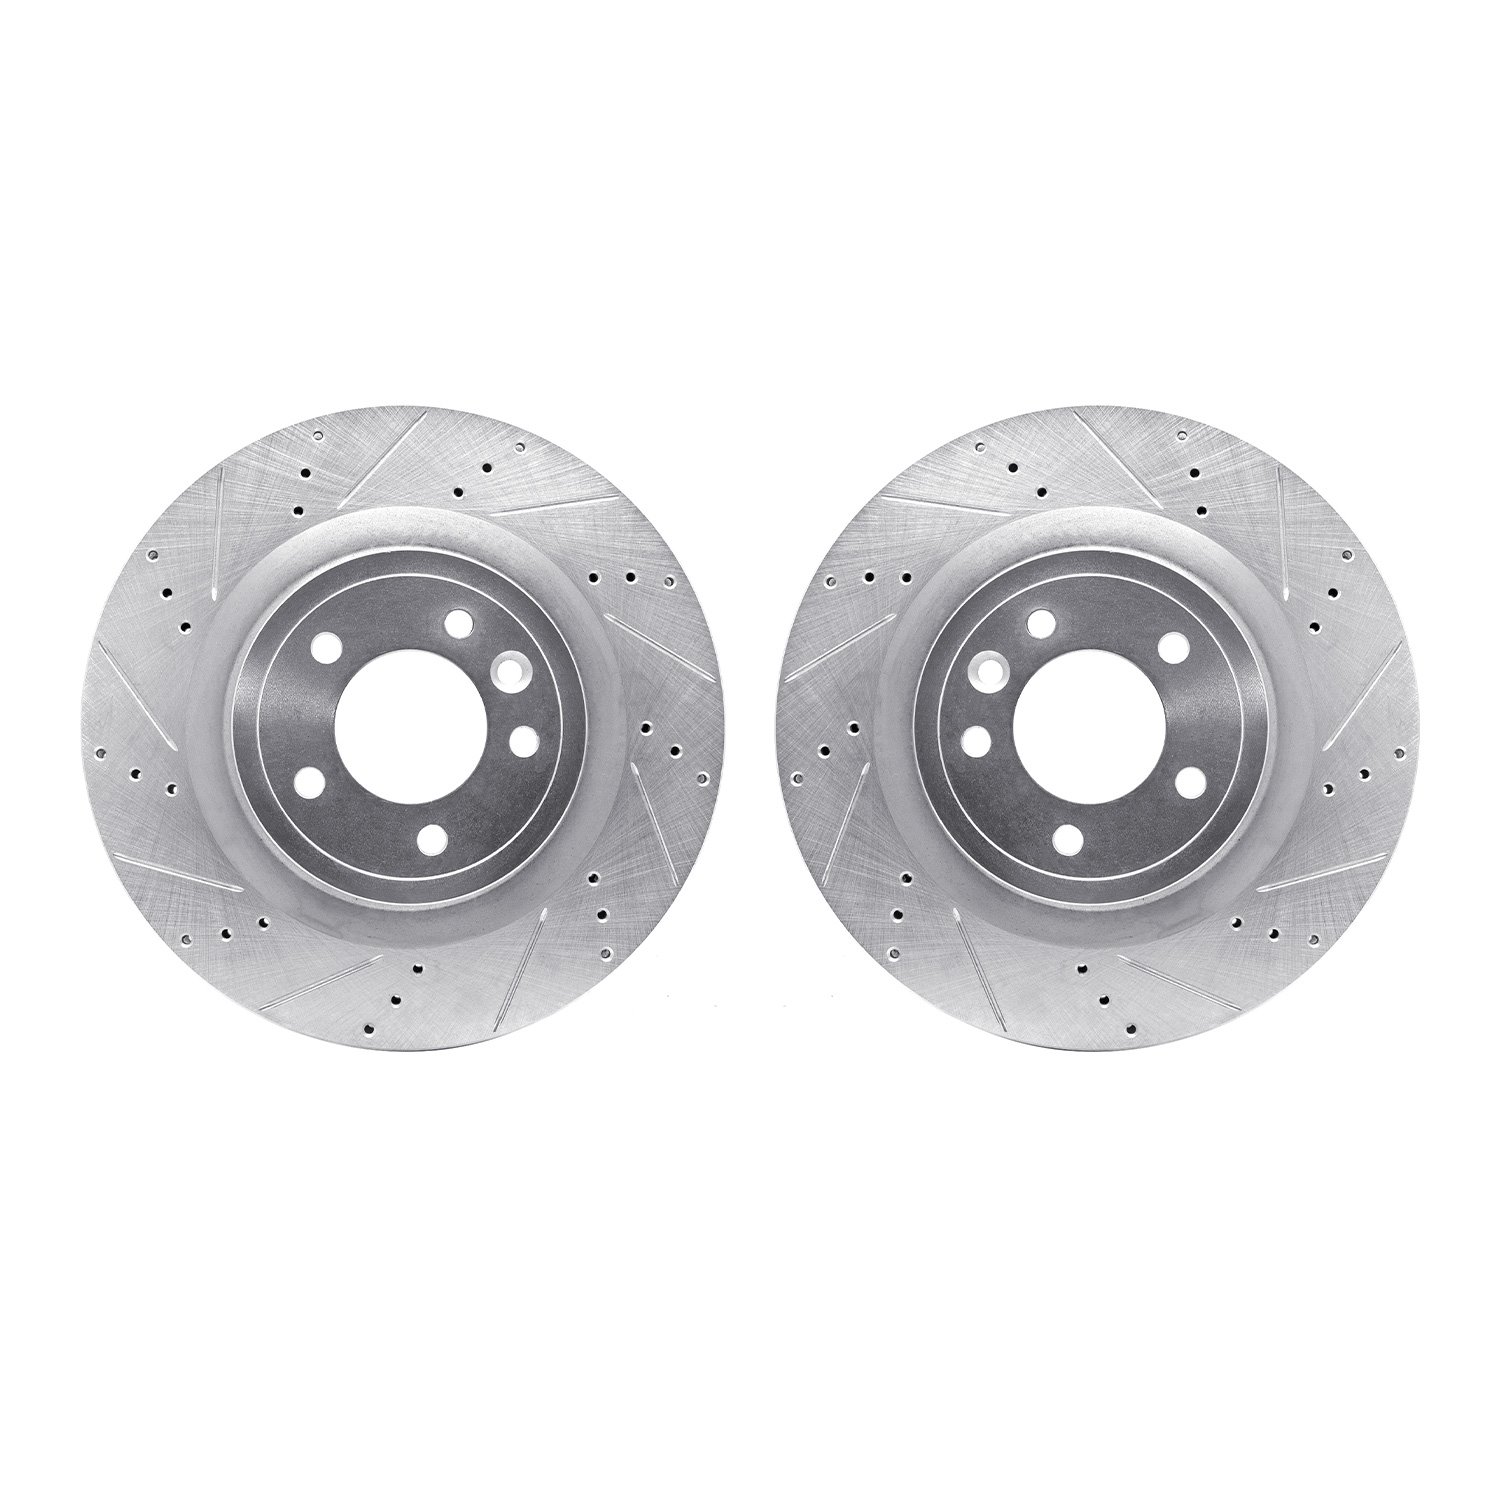 7002-11022 Drilled/Slotted Brake Rotors [Silver], Fits Select Land Rover, Position: Rear